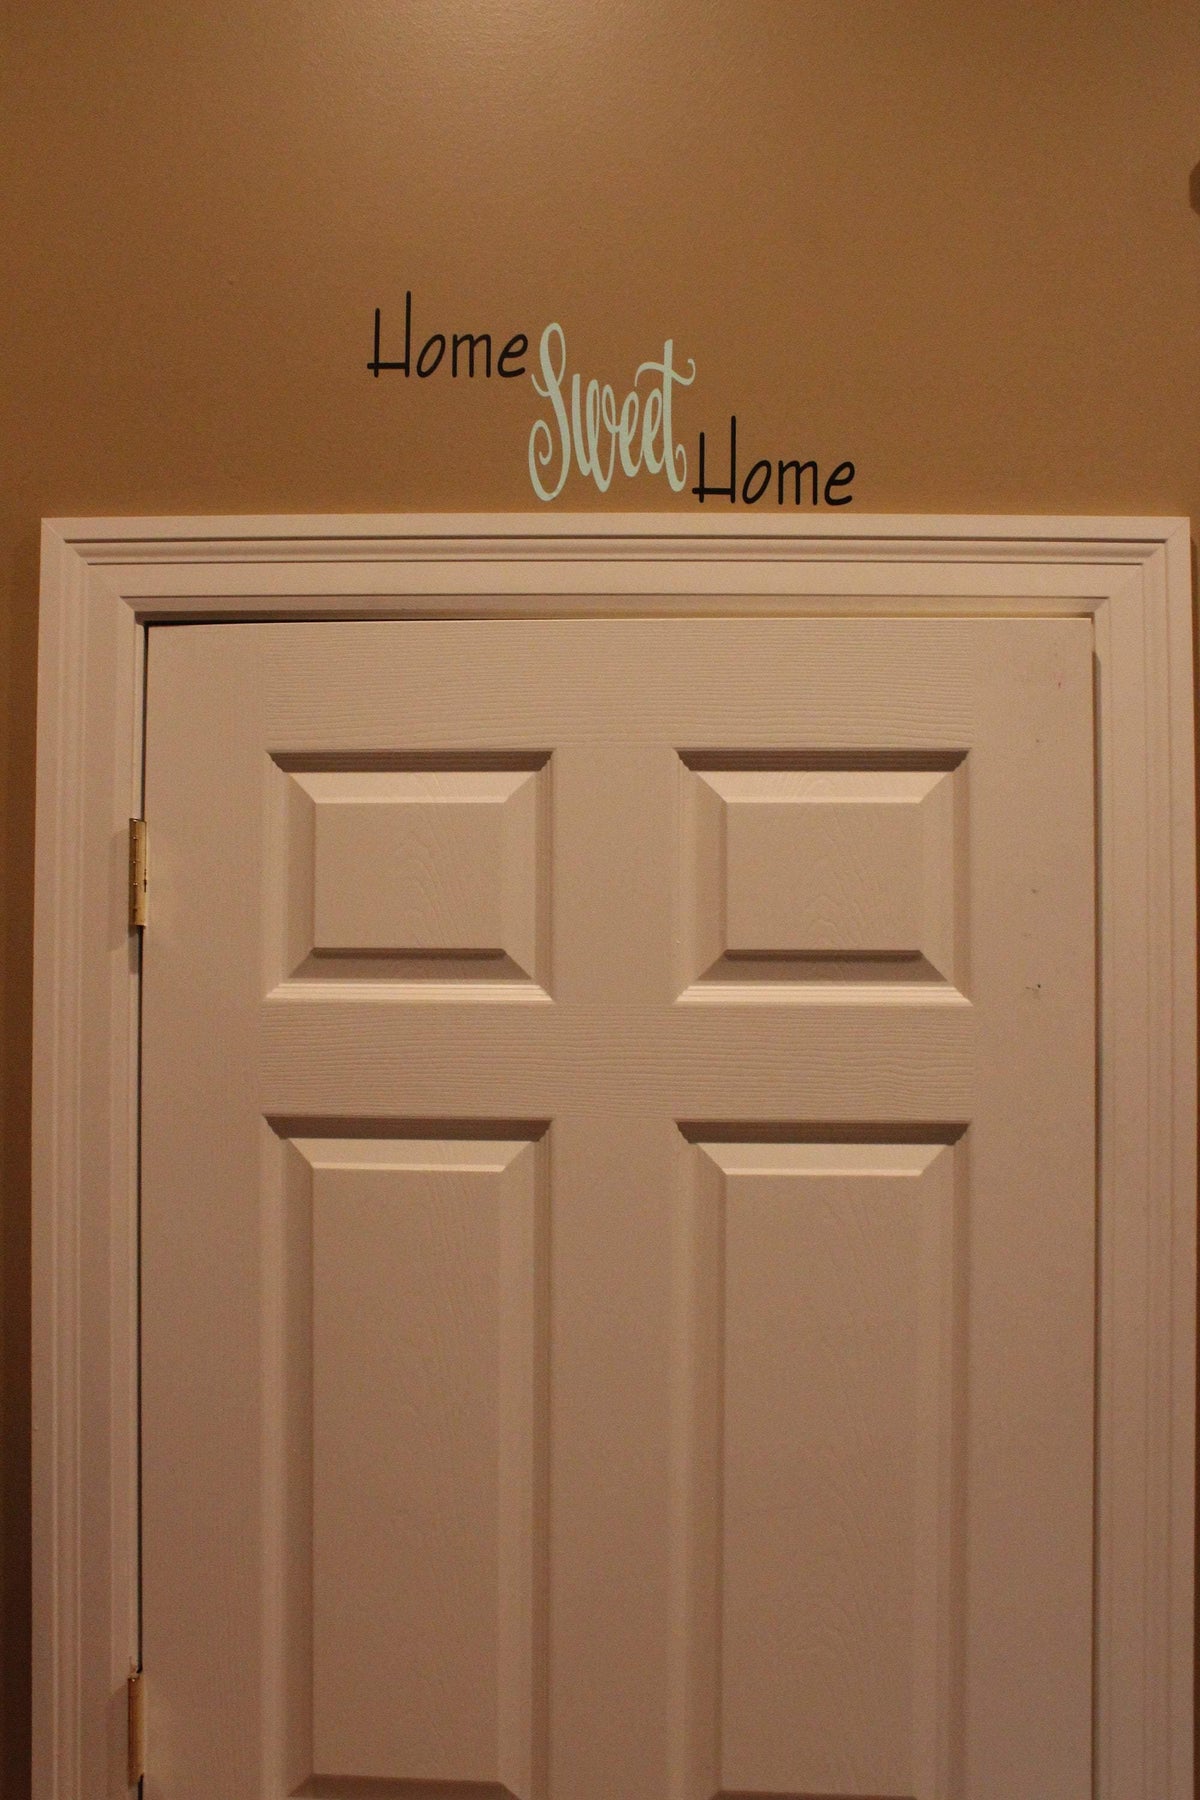 Door Decal | Personalized Vinyl Decal | Monogram Vinyl Decal | Home Sweet Home - This &amp; That Solutions - Door Decal | Personalized Vinyl Decal | Monogram Vinyl Decal | Home Sweet Home - Personalized Gifts &amp; Custom Home Decor